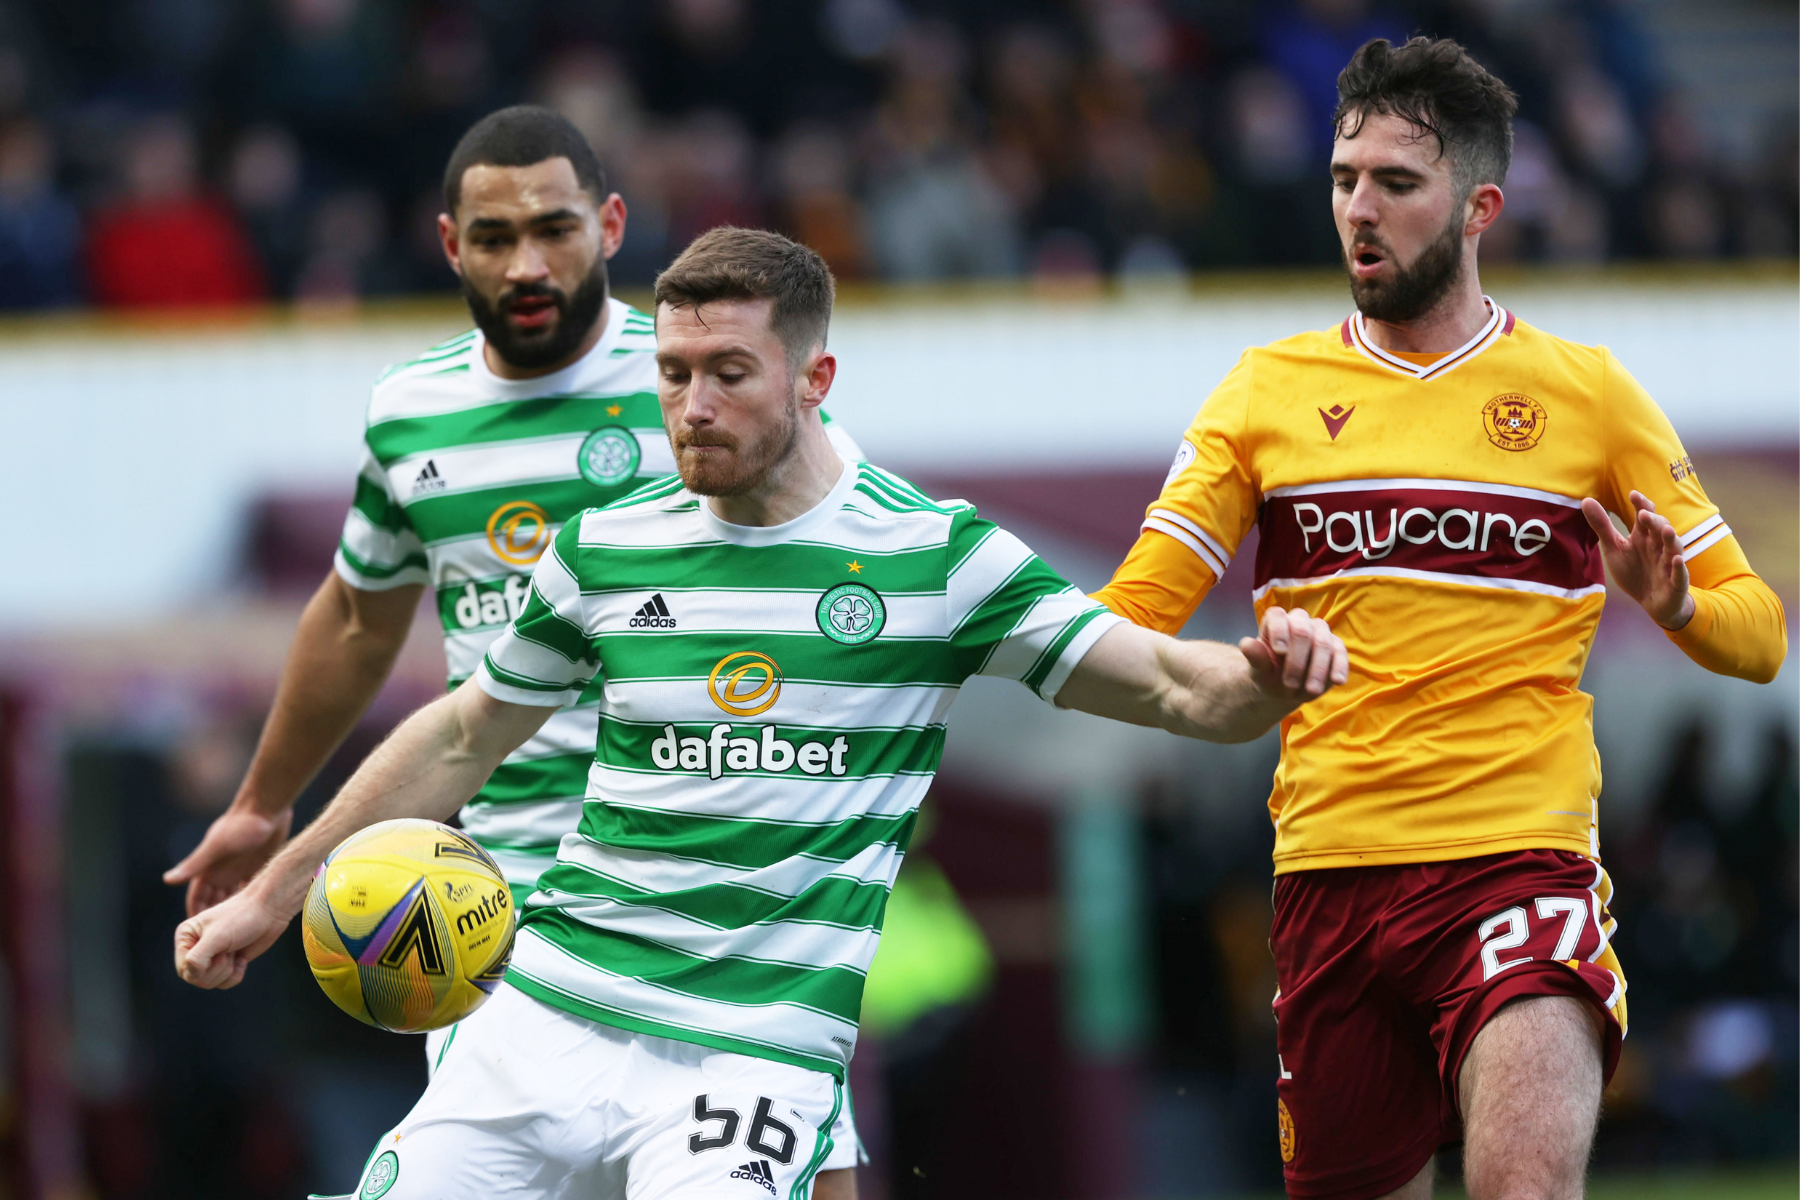 Celtic vs Motherwell: TV channel, live stream and kick-off time